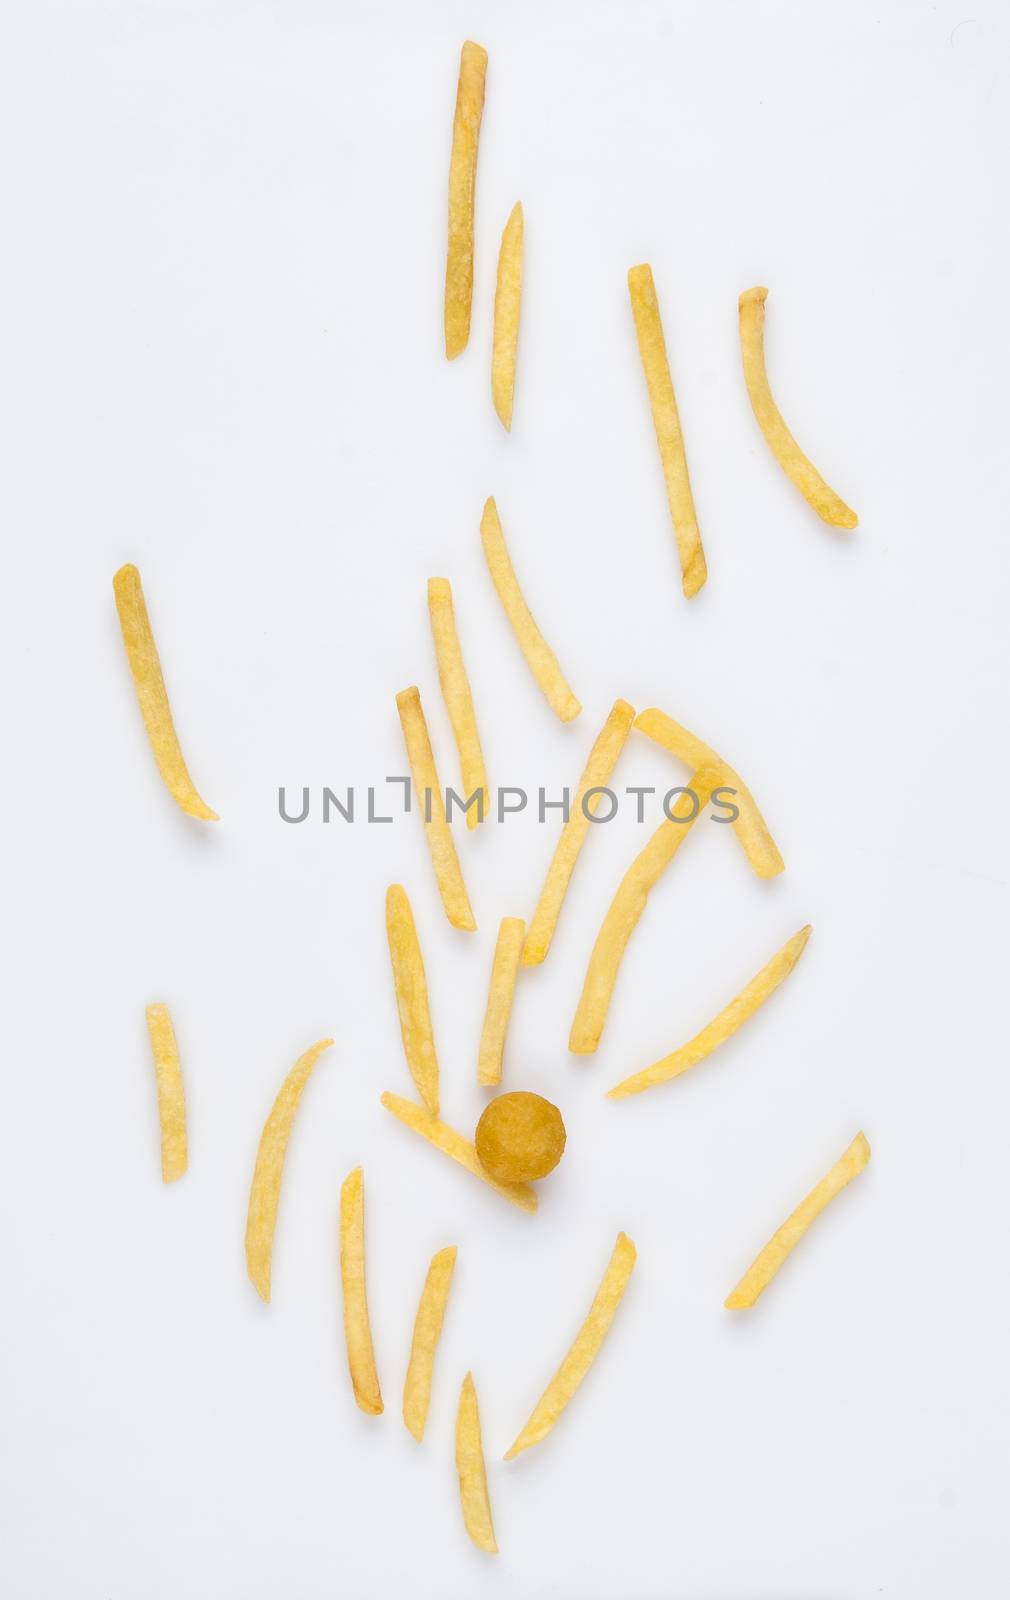 on a white background fried french fries. studio photo of fried french fries on white background